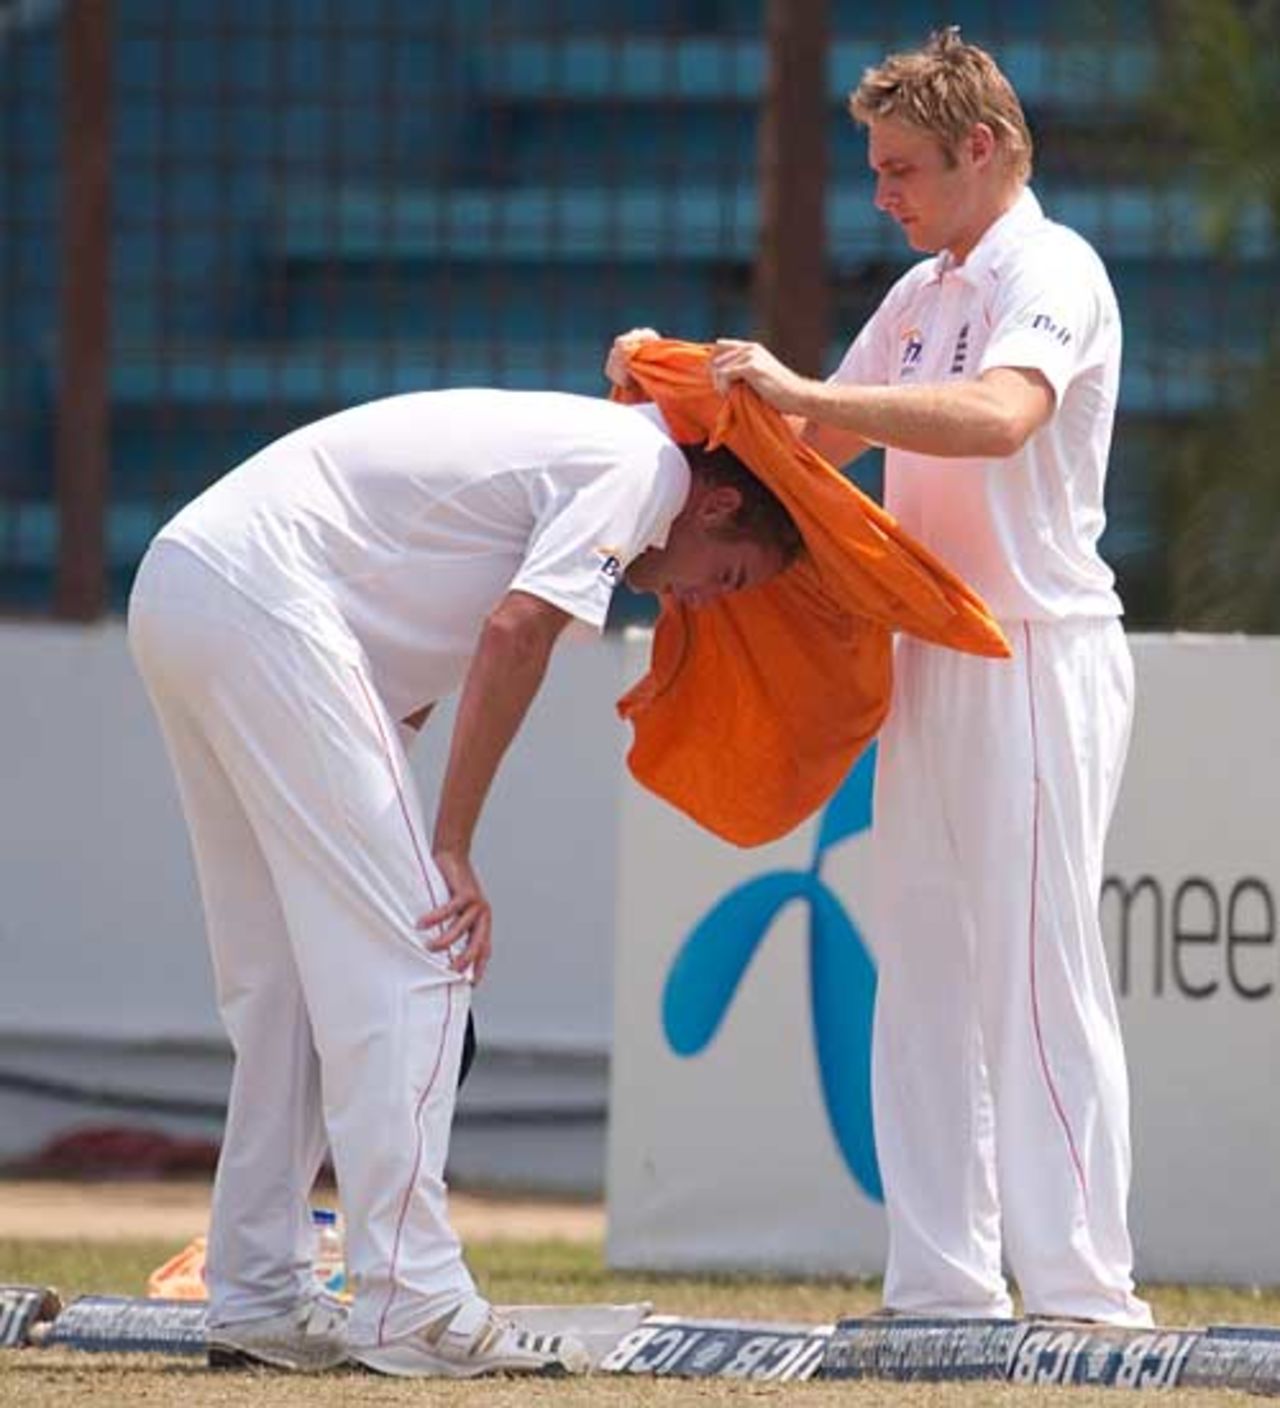 It was hot work for the England bowlers and Stuart Broad gets a cold towel, Bangladesh v England, 1st Test, Chittagong, March 15, 2010